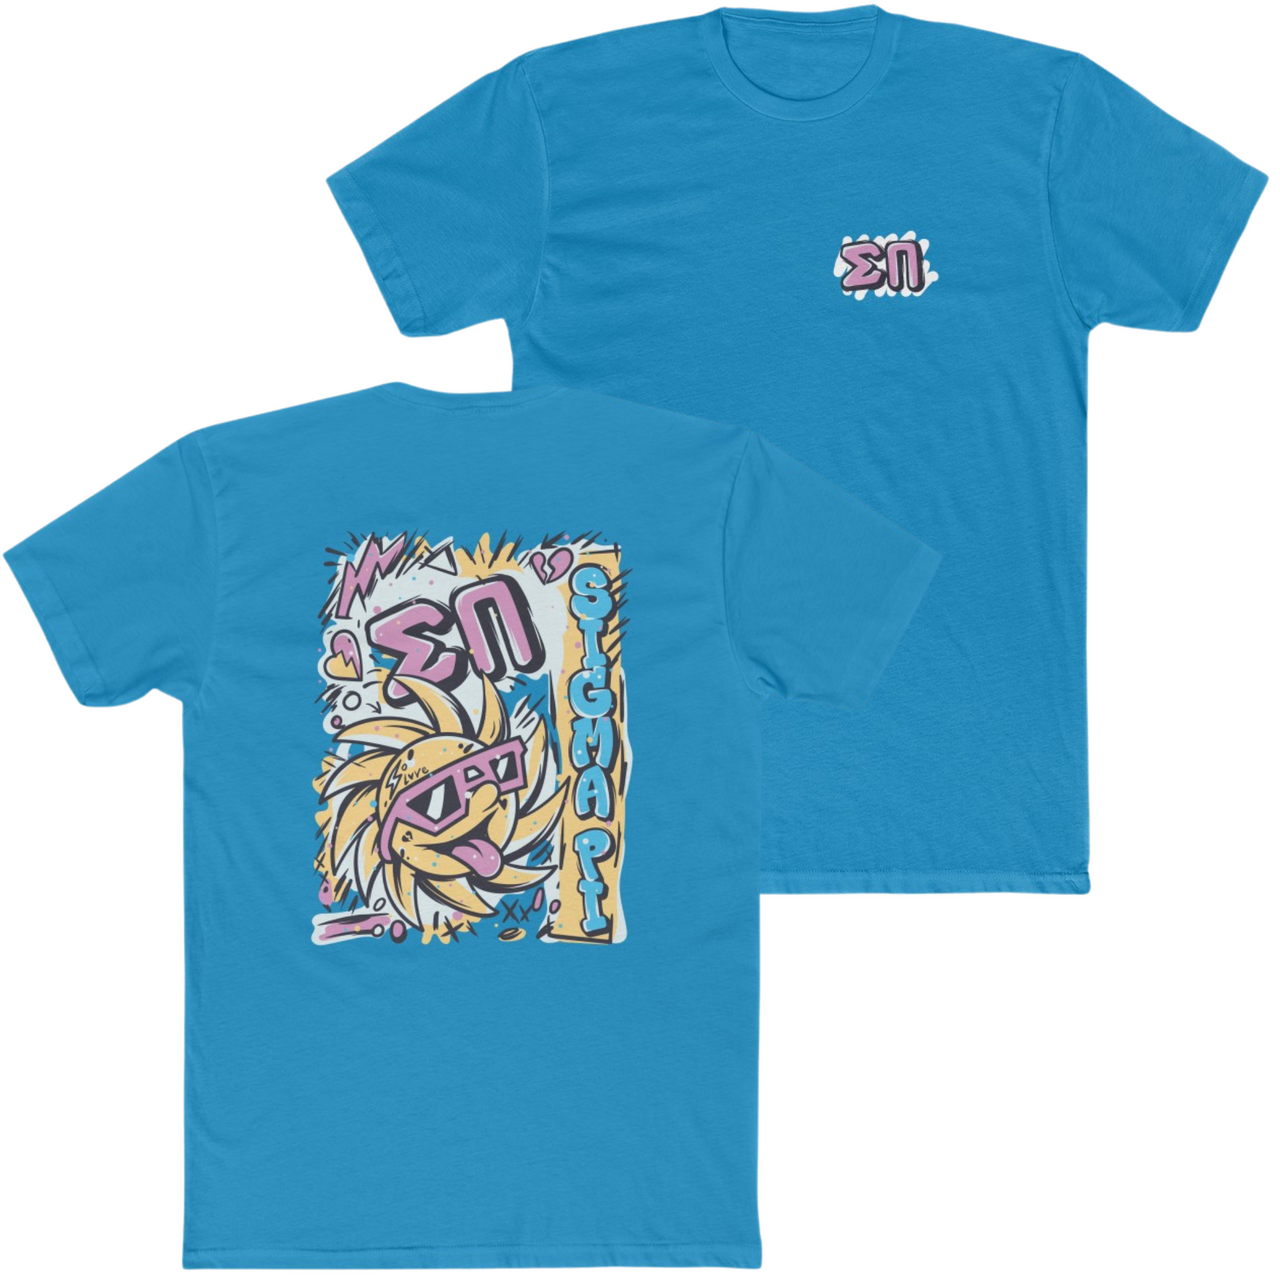 Turquoise Sigma Pi Graphic T-Shirt | Fun in the Sun | Sigma Pi Apparel and Merchandise 